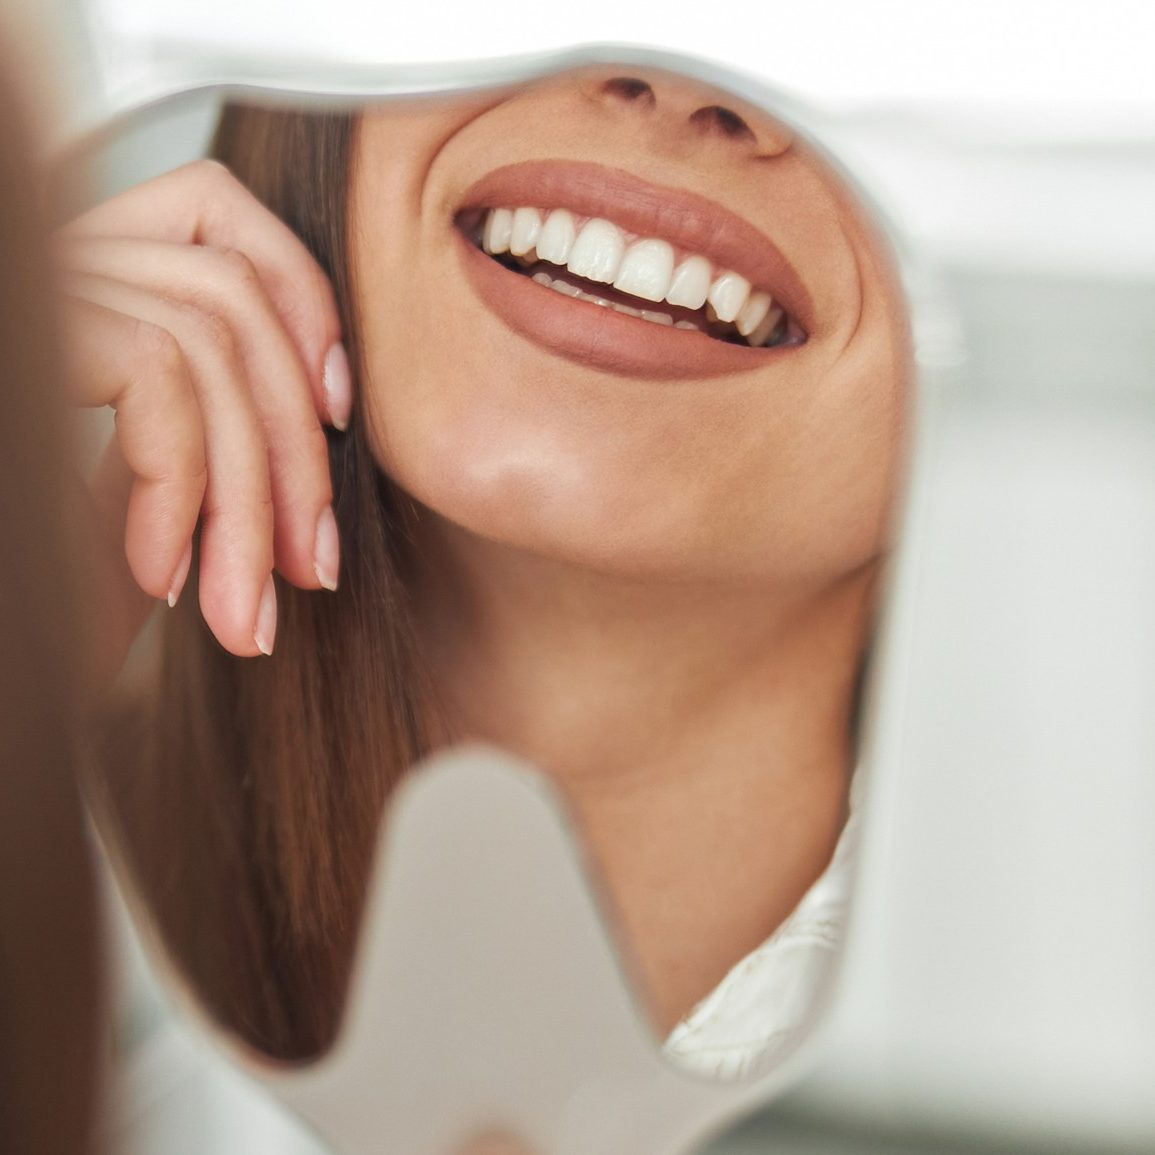 happy-young-woman-smiling-checking-out-her-perfect-healthy-teeth-mirror-close-up-dentist-office